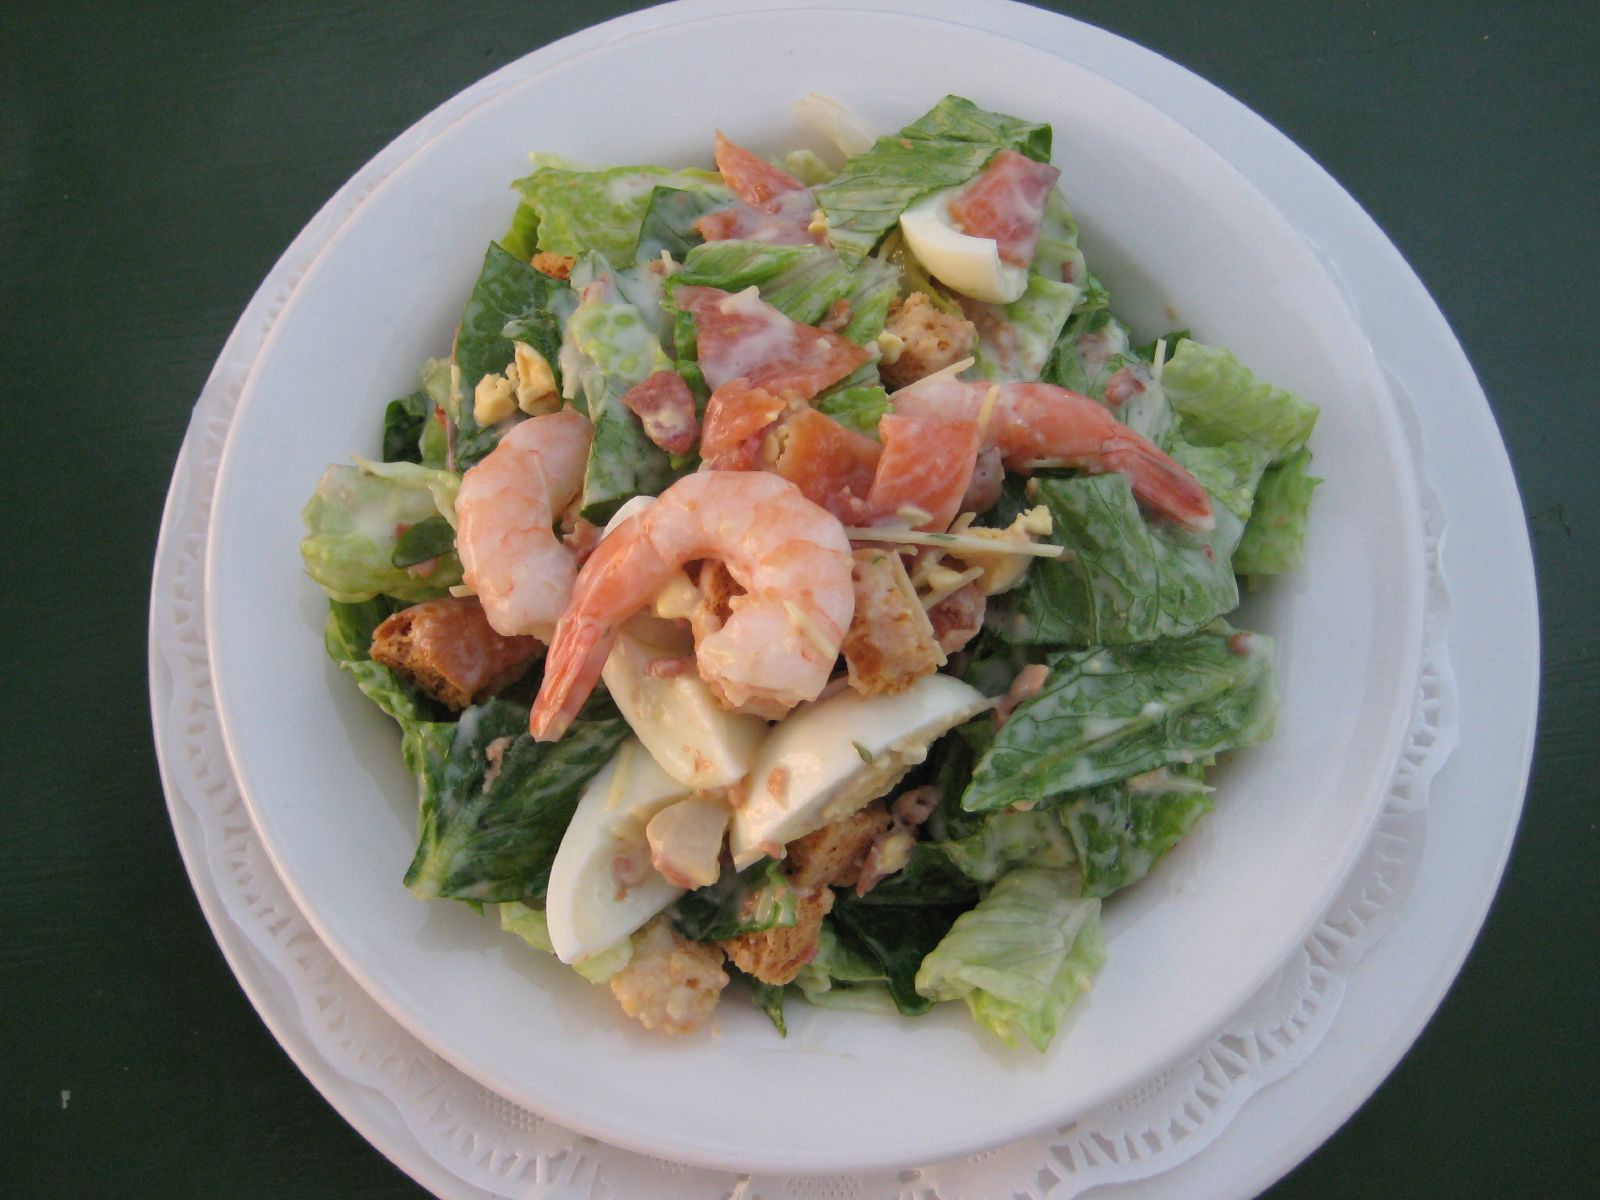 this salad has shrimp, lettuce and croutons